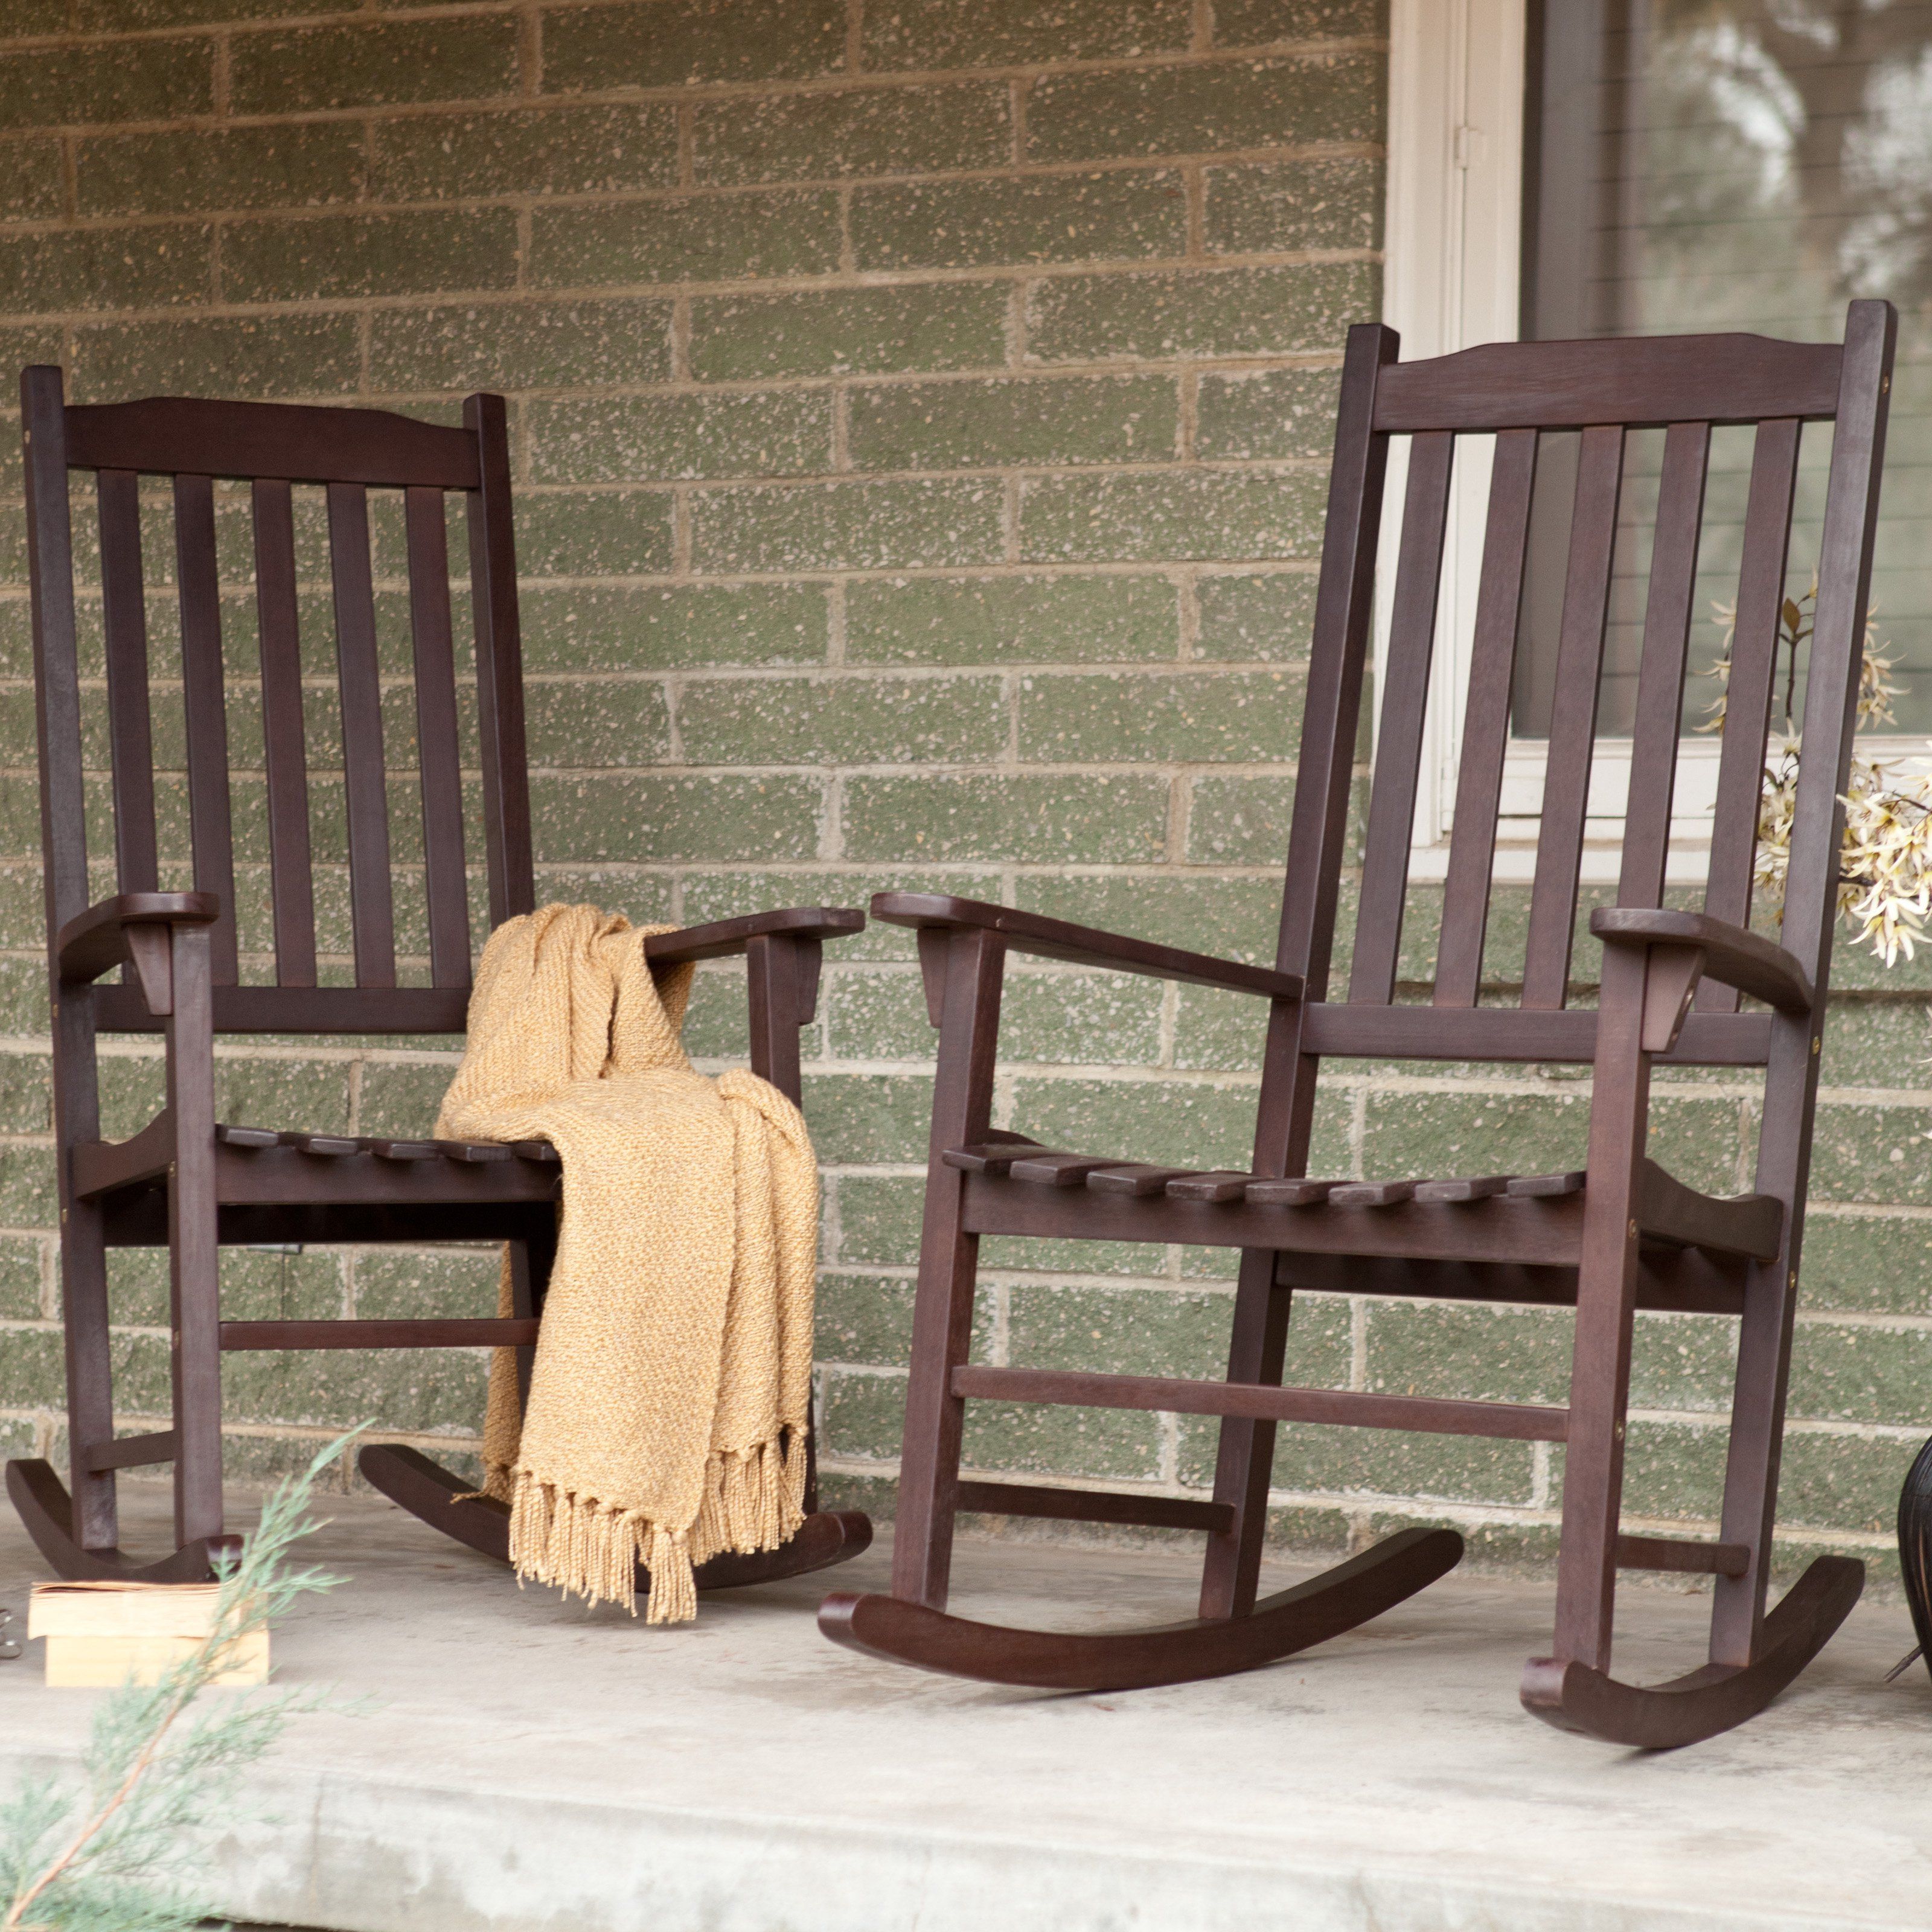 Mission Style Rocking Chair: History And Designs | Homesfeed In Elegant Tobacco Brown Wooden Rocking Chairs (View 15 of 20)